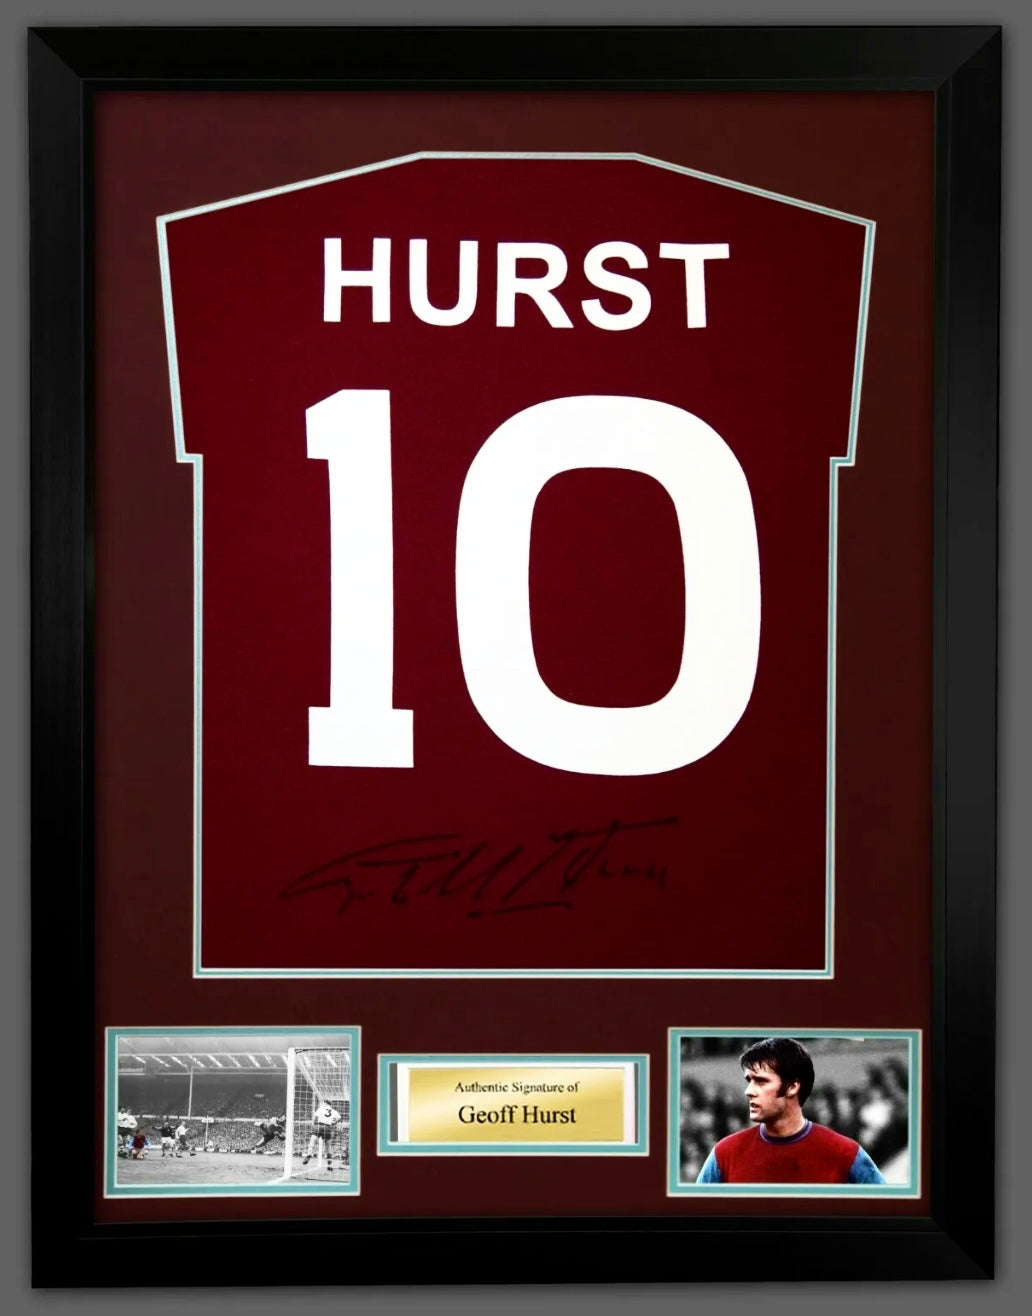 West Ham United FC Geoff Hurst Autographed 10 Football Shirt with Certificate of Authenticity